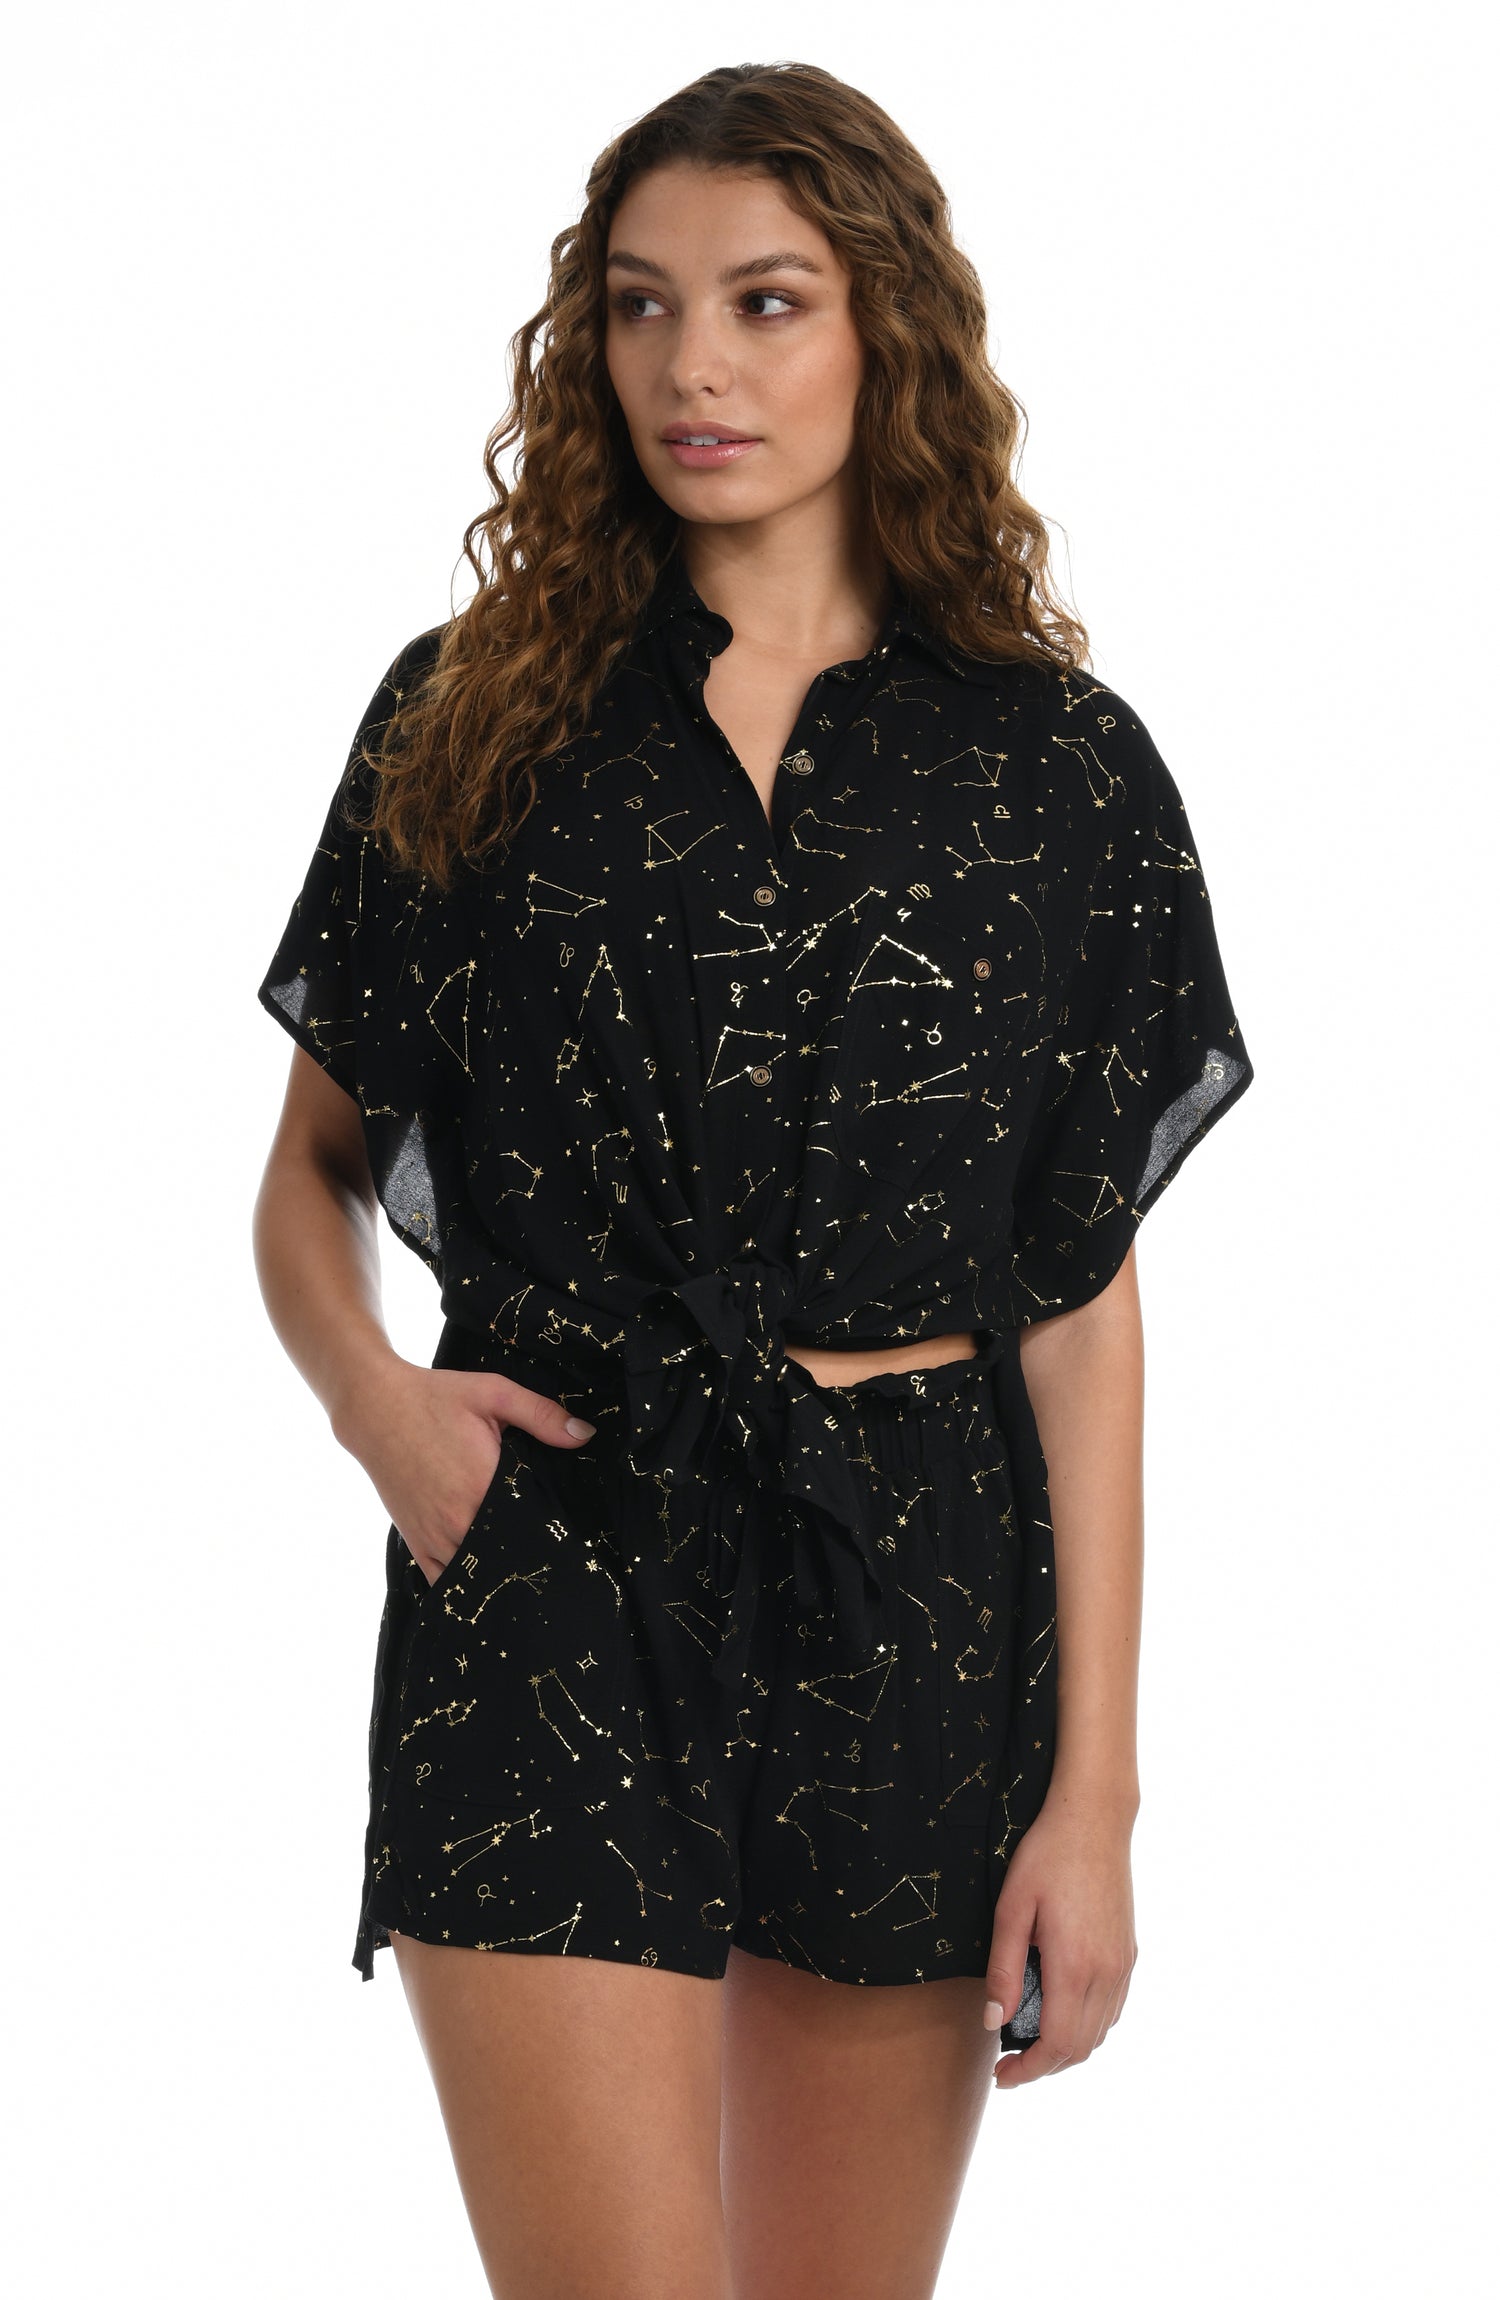 Model is wearing a solid black colored resort button down cover up shirt from our Zodiac collection.